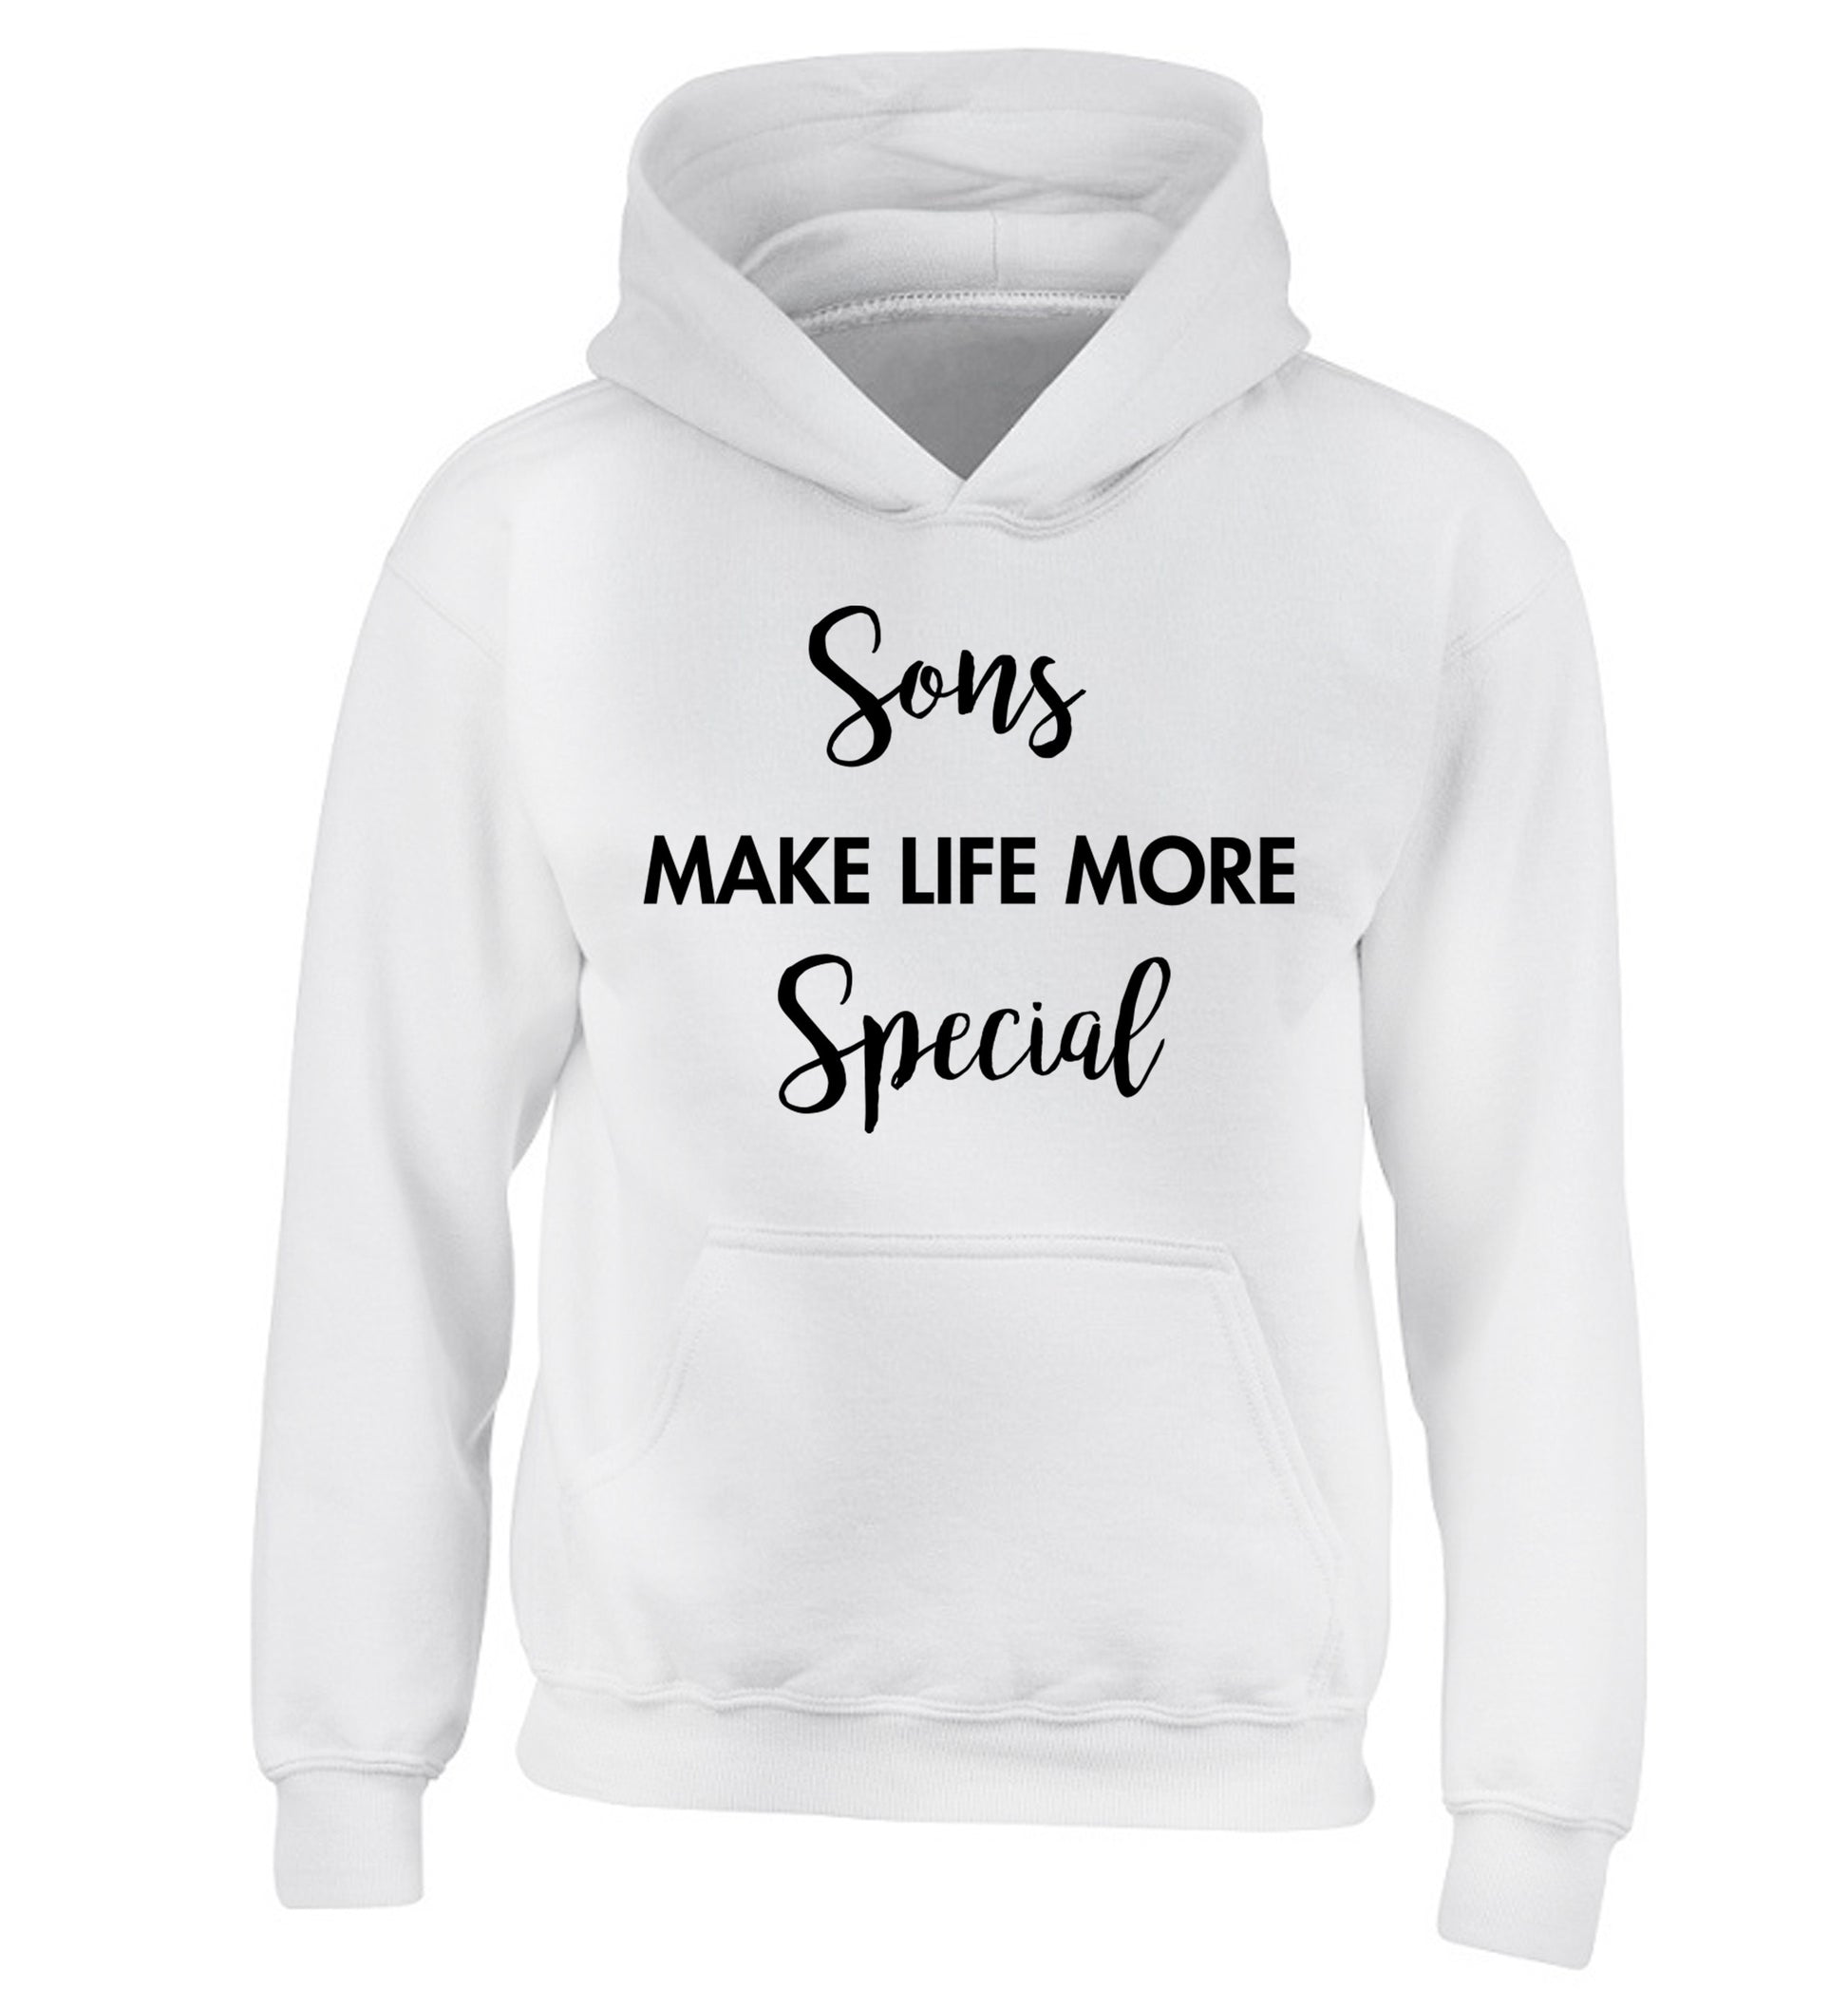 Sons make life more special children's white hoodie 12-14 Years